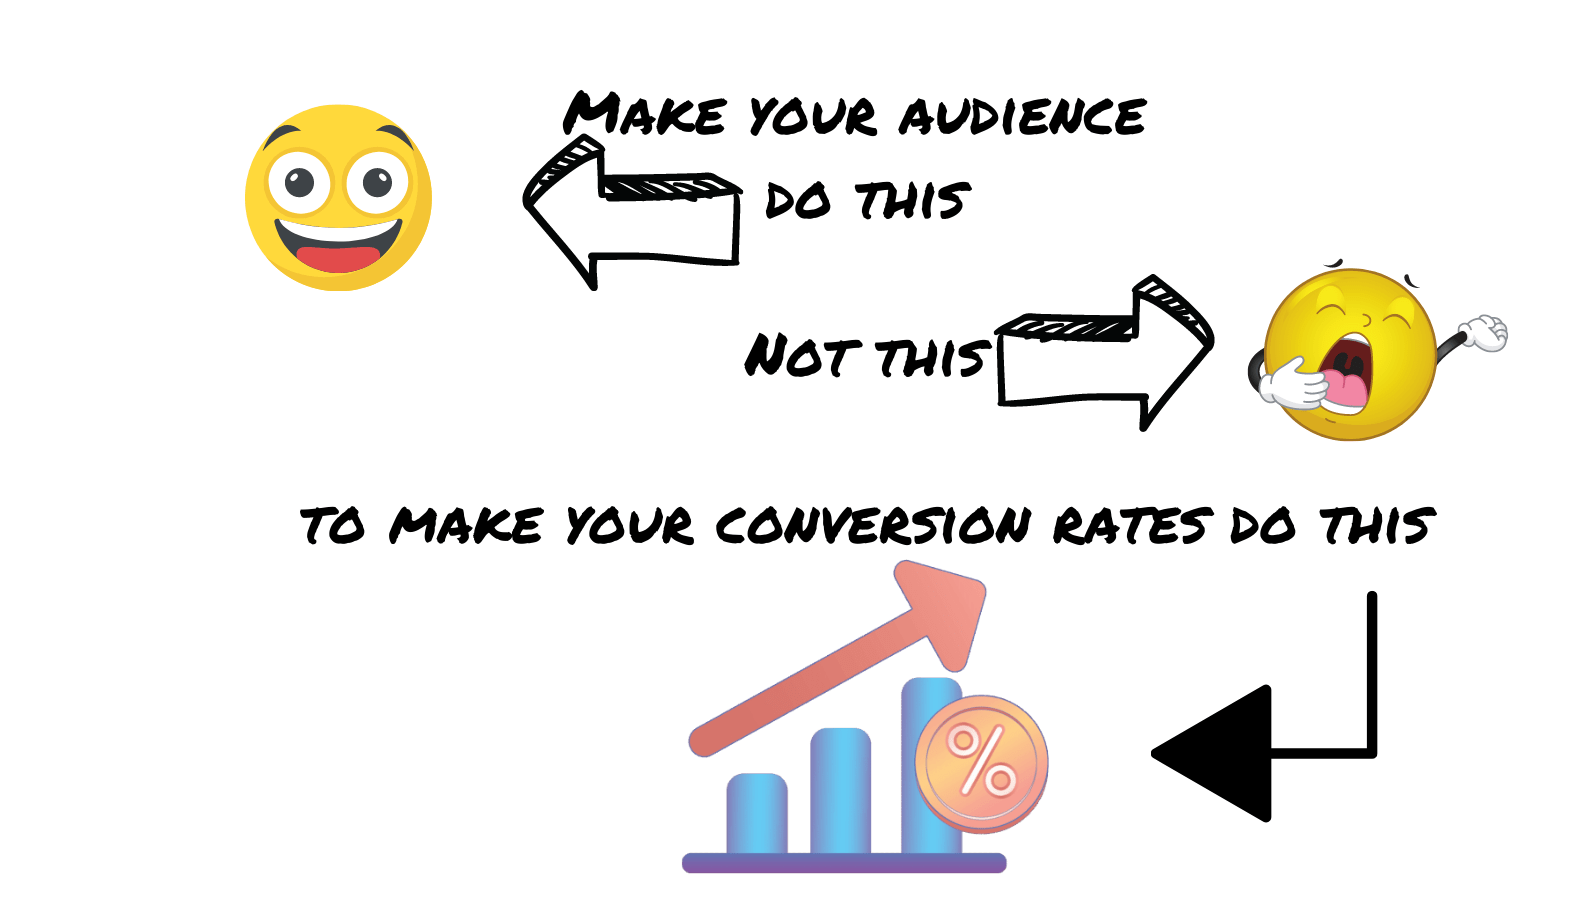 Don't bore your audience if you want higher conversion.